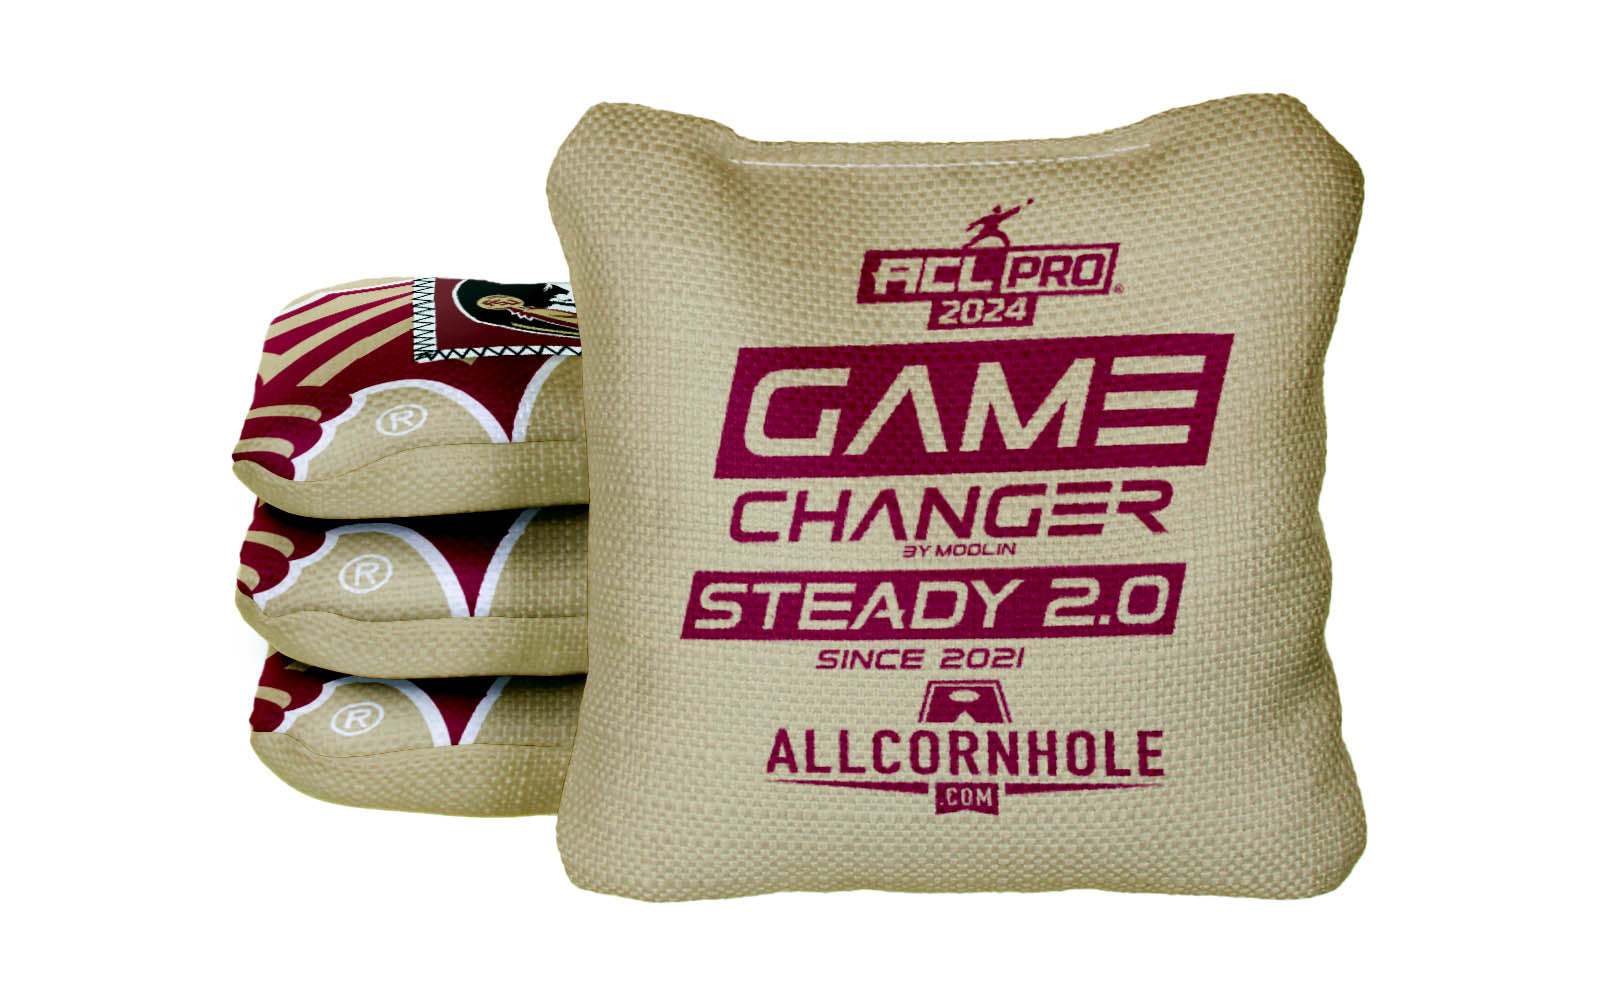 Officially Licensed Collegiate Cornhole Bags - AllCornhole Game Changers Steady 2.0 - Set of 4 - Florida State University